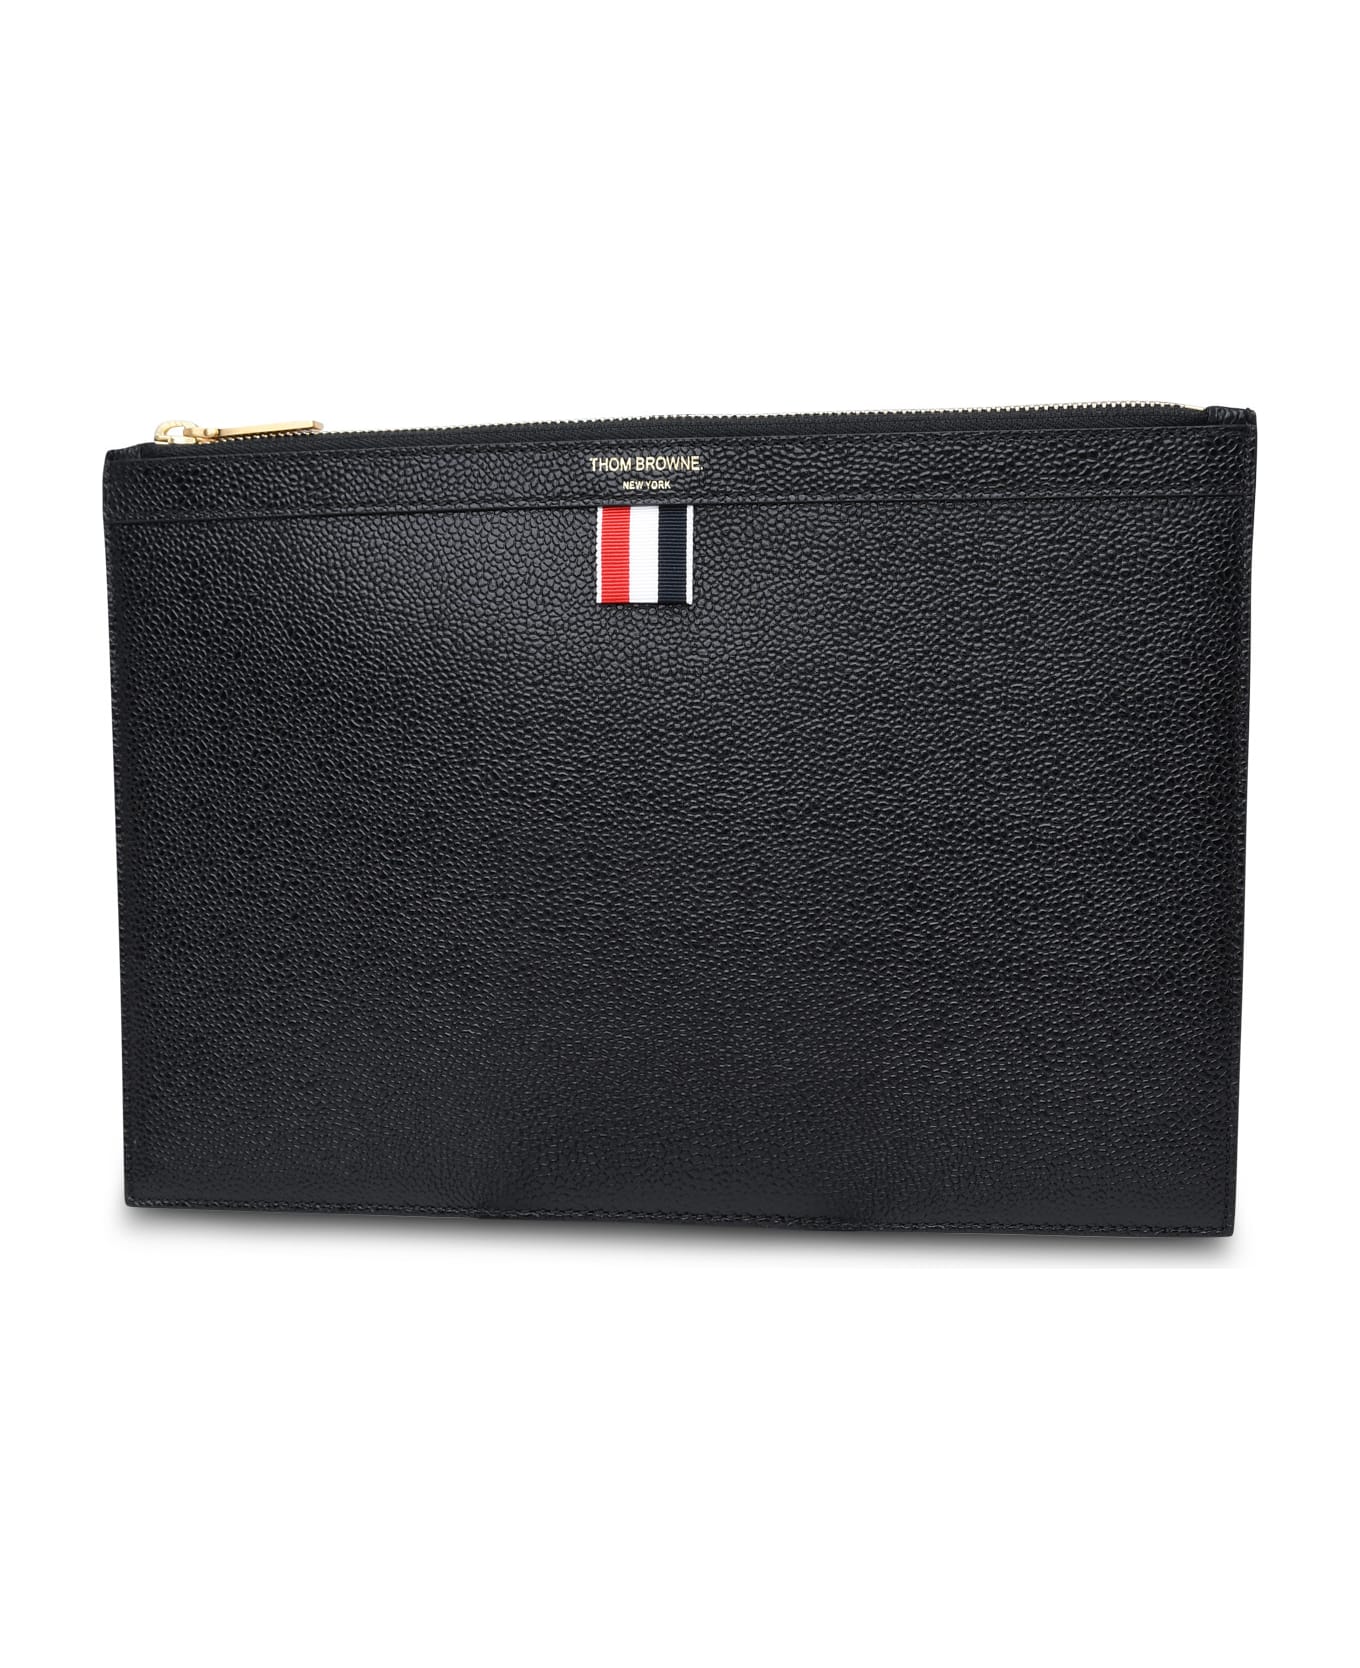 Thom Browne Black Leather Small Document Holder - Black バッグ